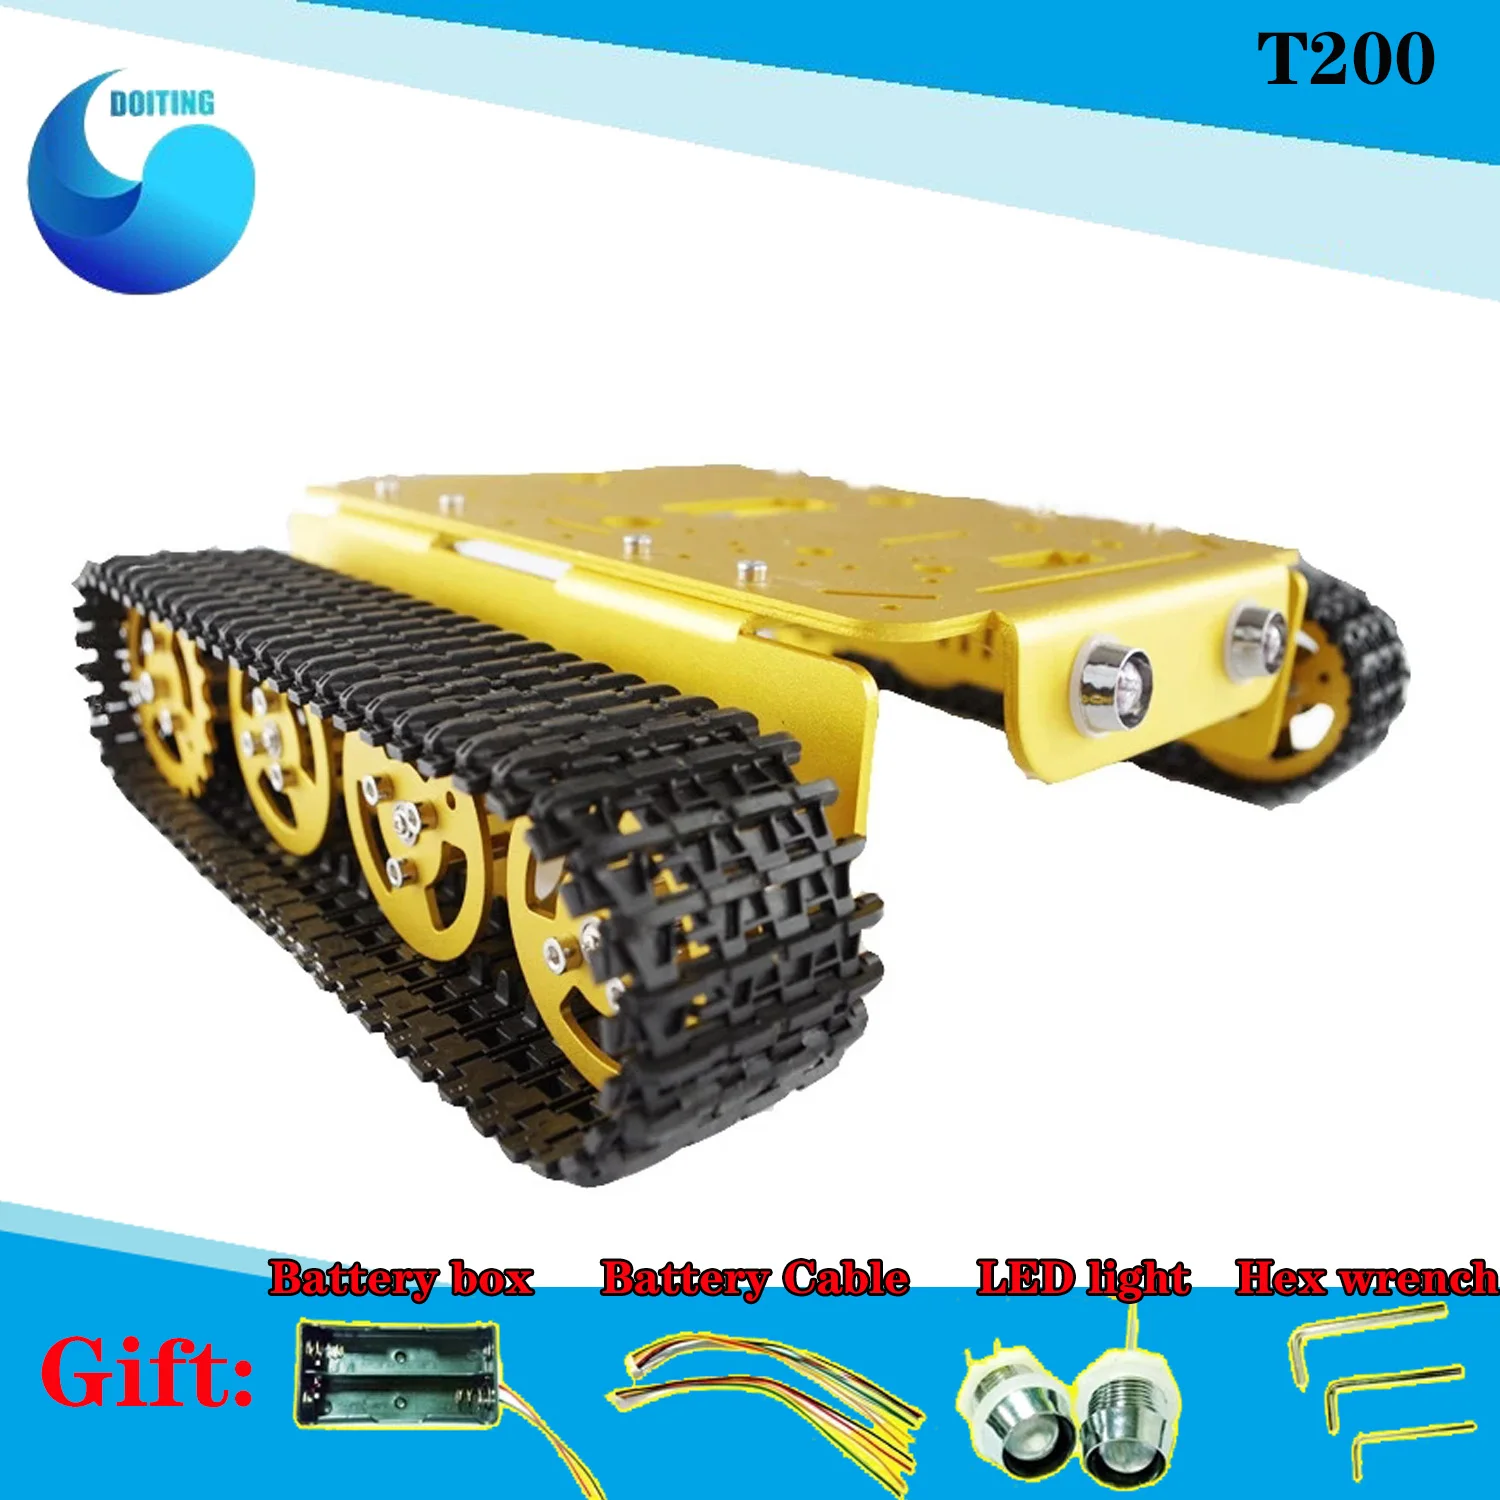 

DOIT T200 RC metal Tank Chassis with Bearings Caterpillar Tractor Crawler Intelligent Robot Car Obstacle Avoidance DIY Toy